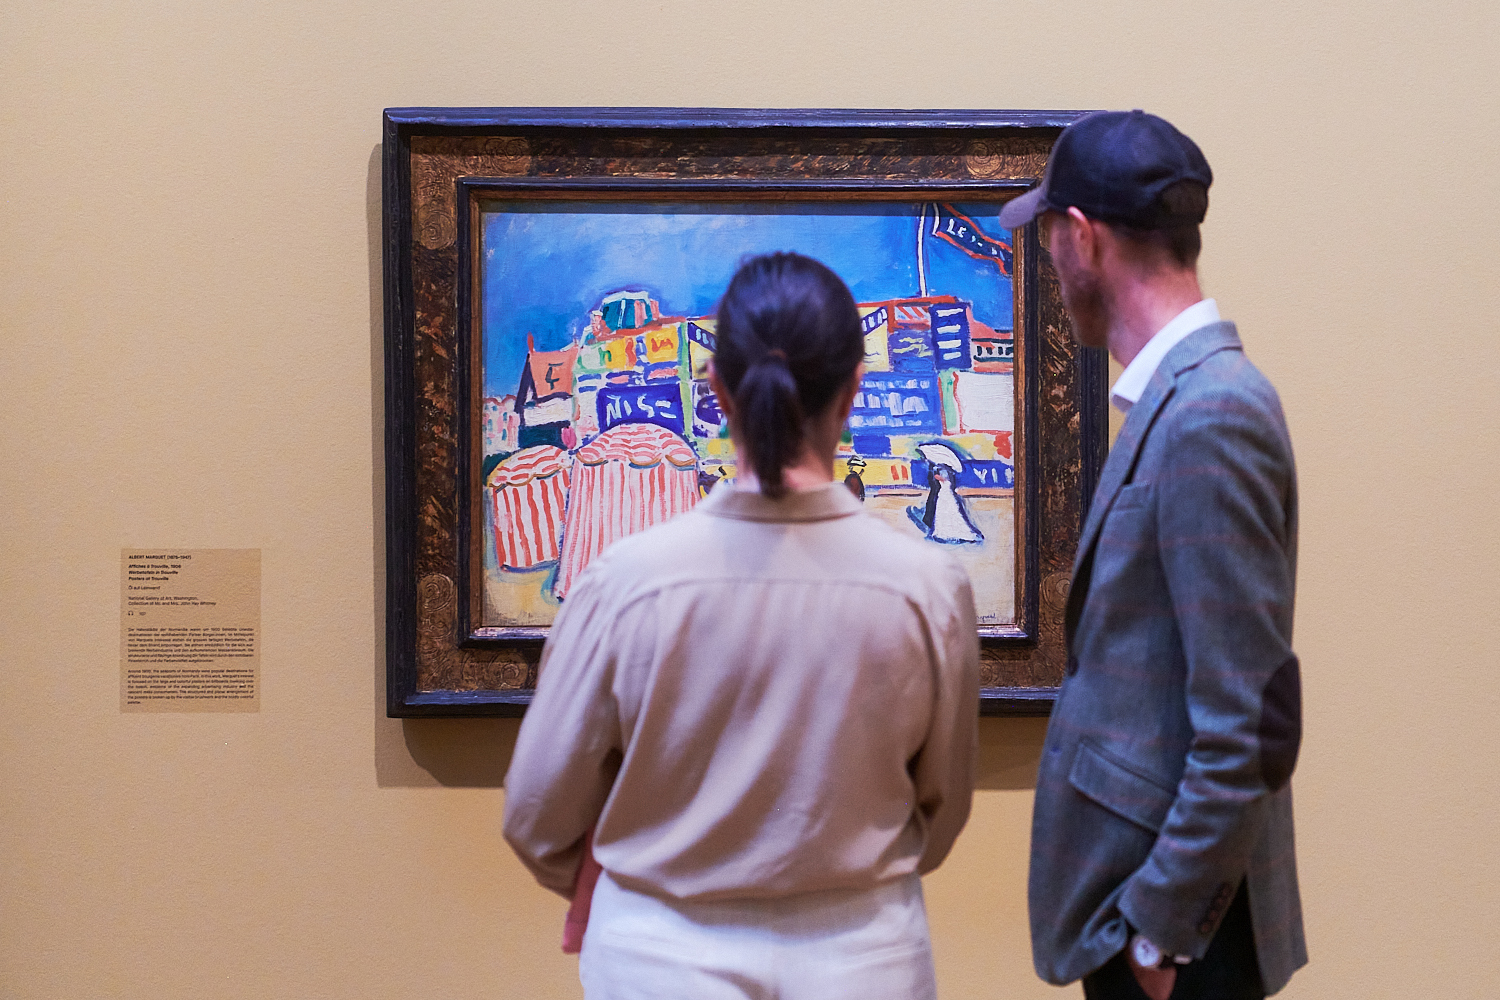 Albert Marquet, Affiches à Trouville, 1906, National Gallery of Art, Washington, Collection of Mr. and Mrs. John Hay Whitney, Foto: Ronja Burkard